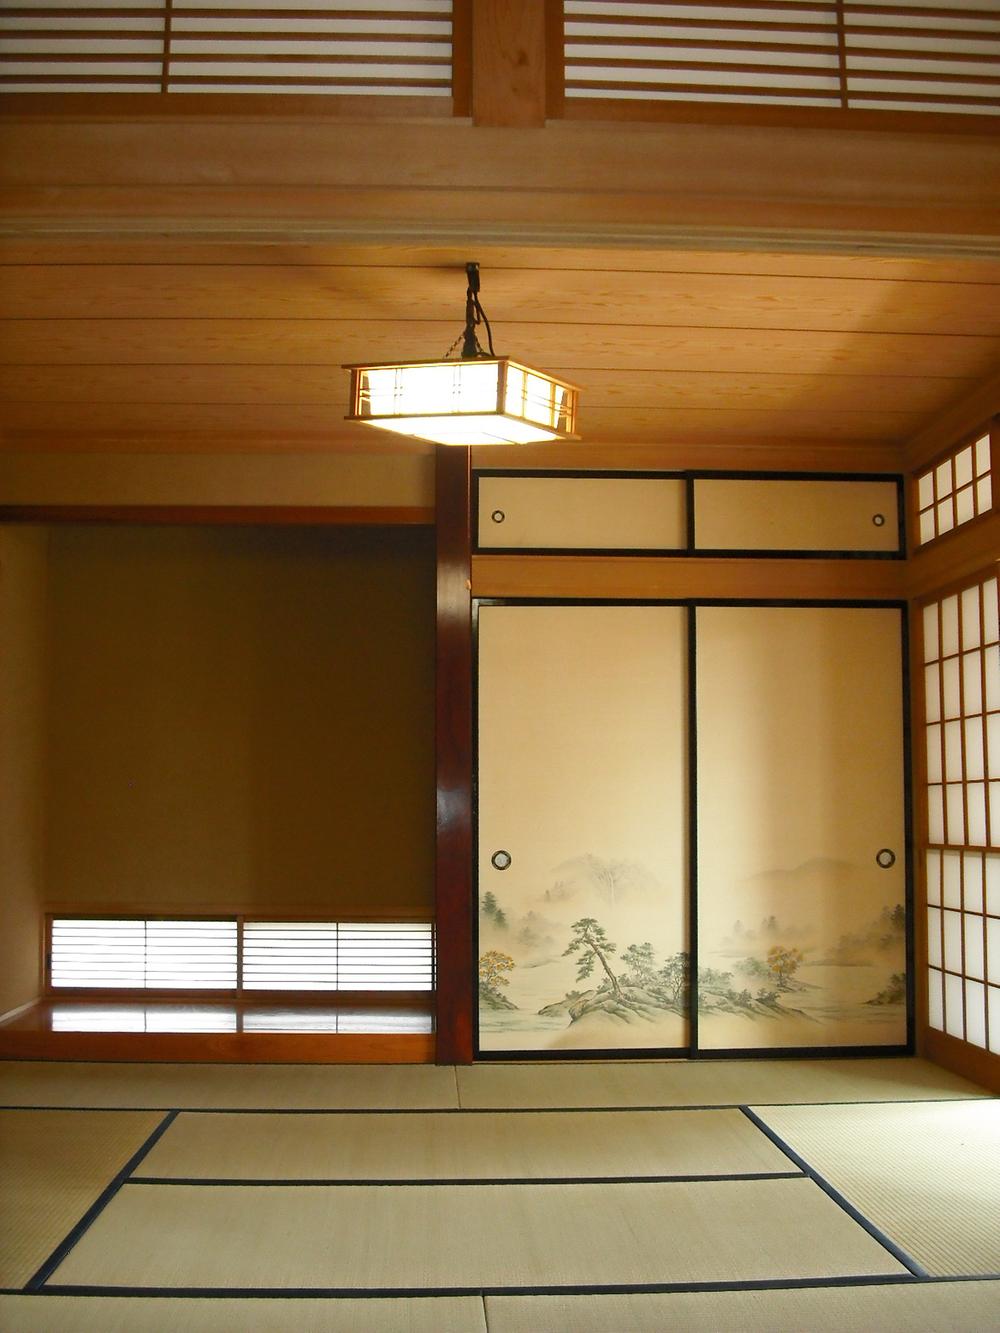 Other introspection. Between the Japanese-style room through